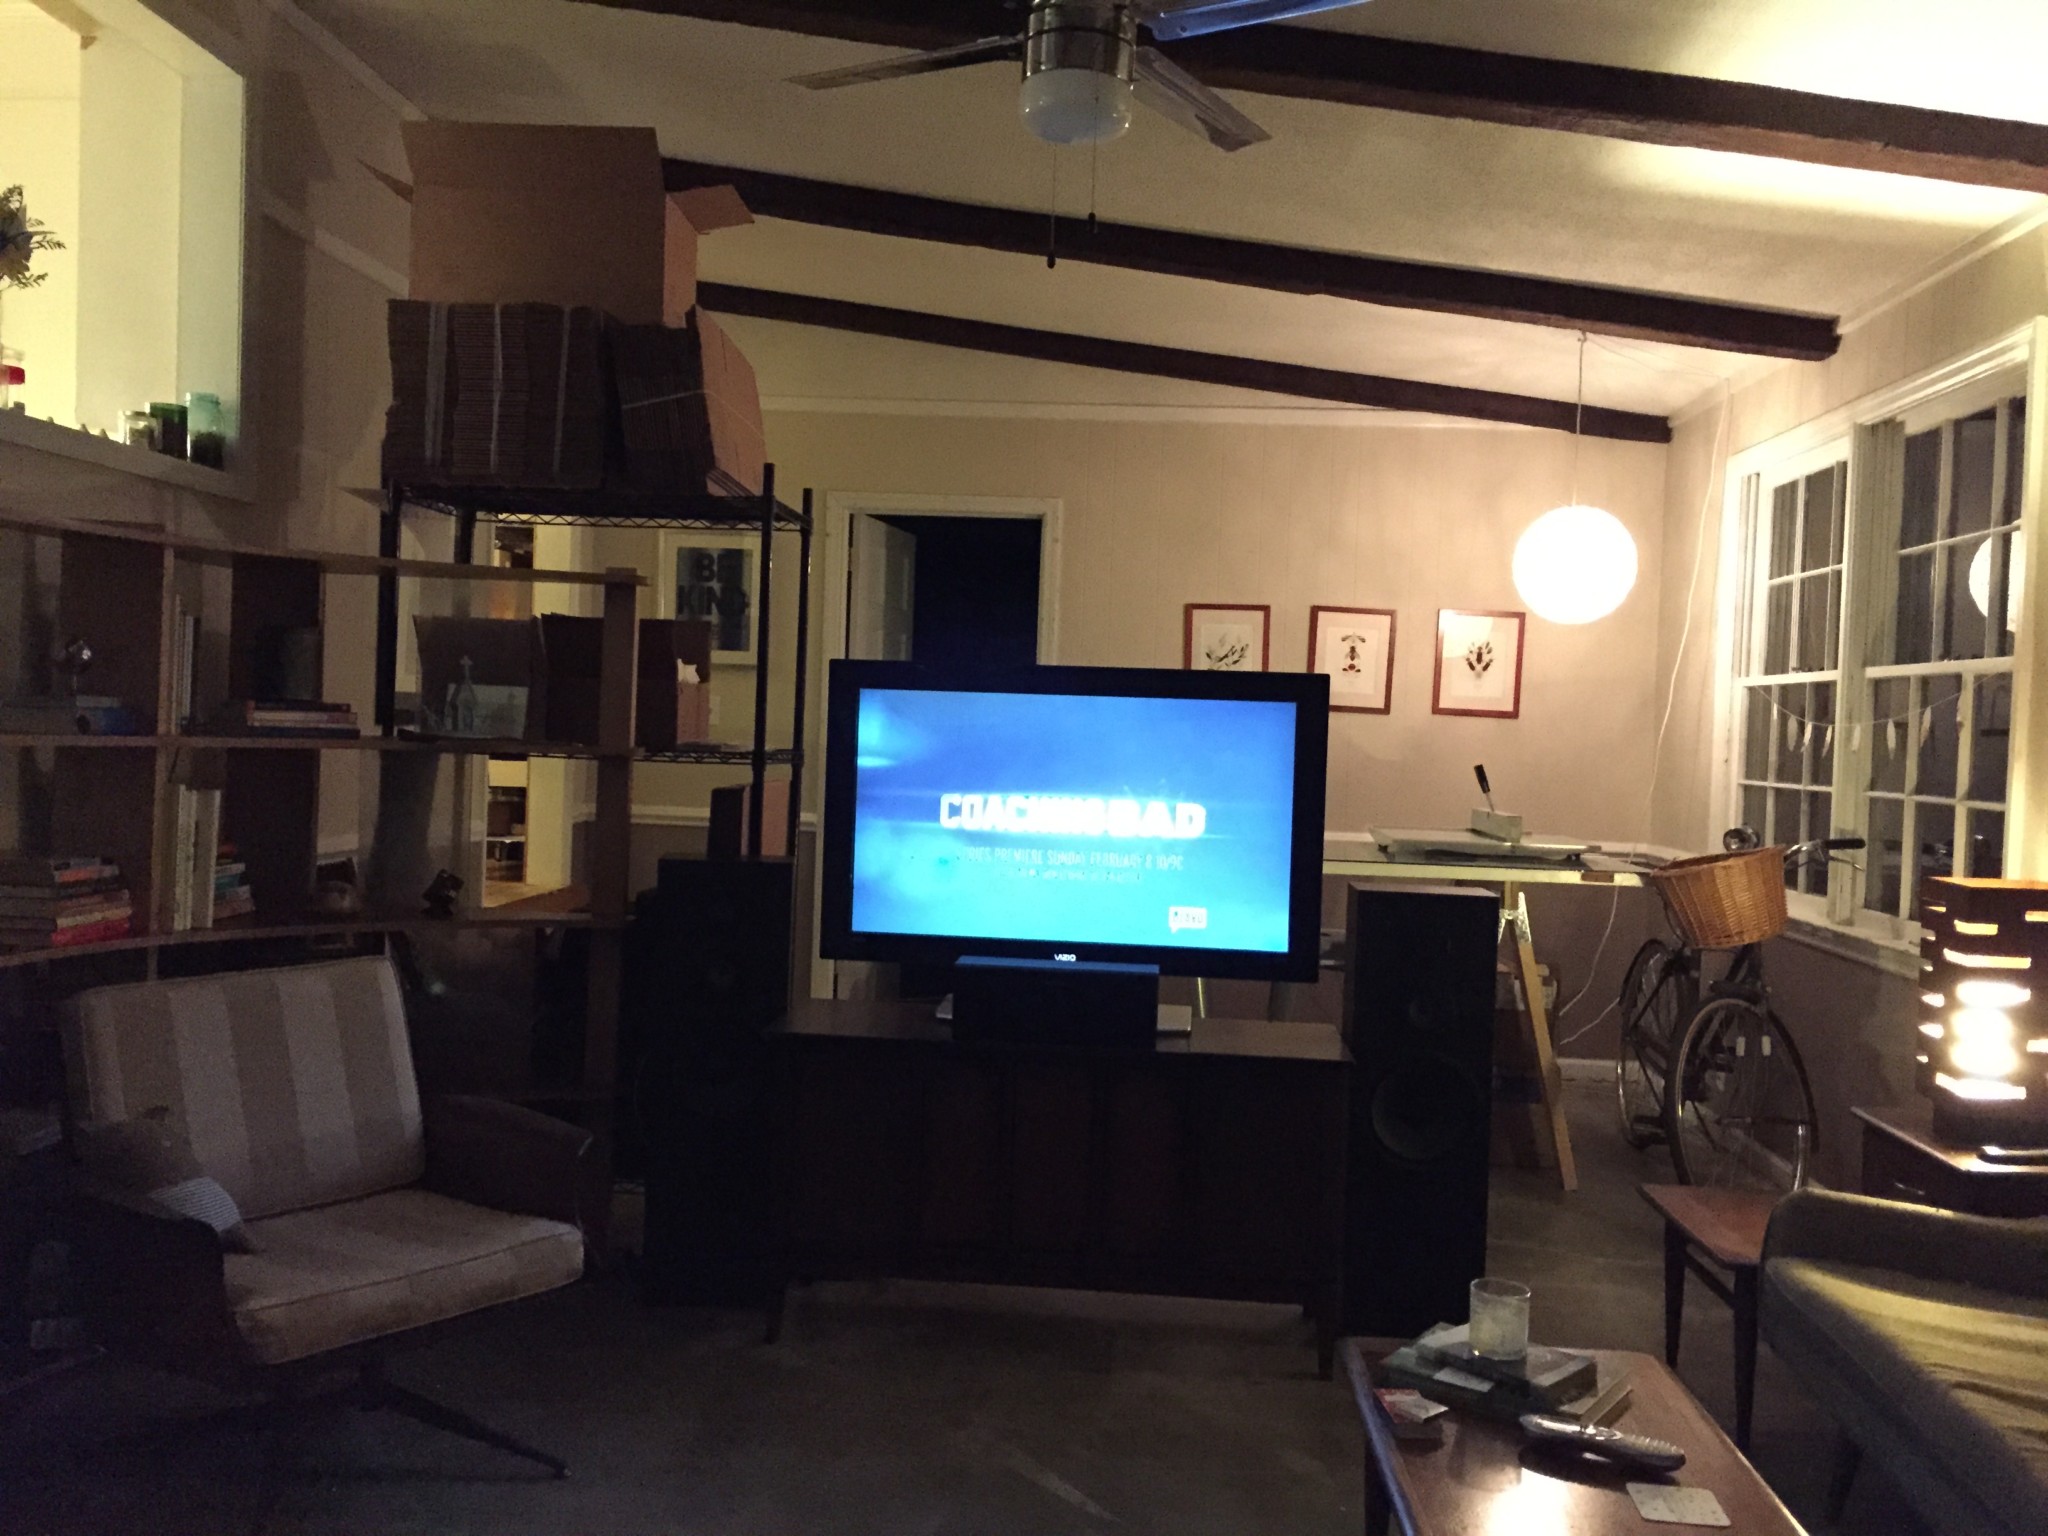 TV, chair, bookcase, and couch are positioned in one-half of the living room with a work table and inventory shelf against the remainder of the room